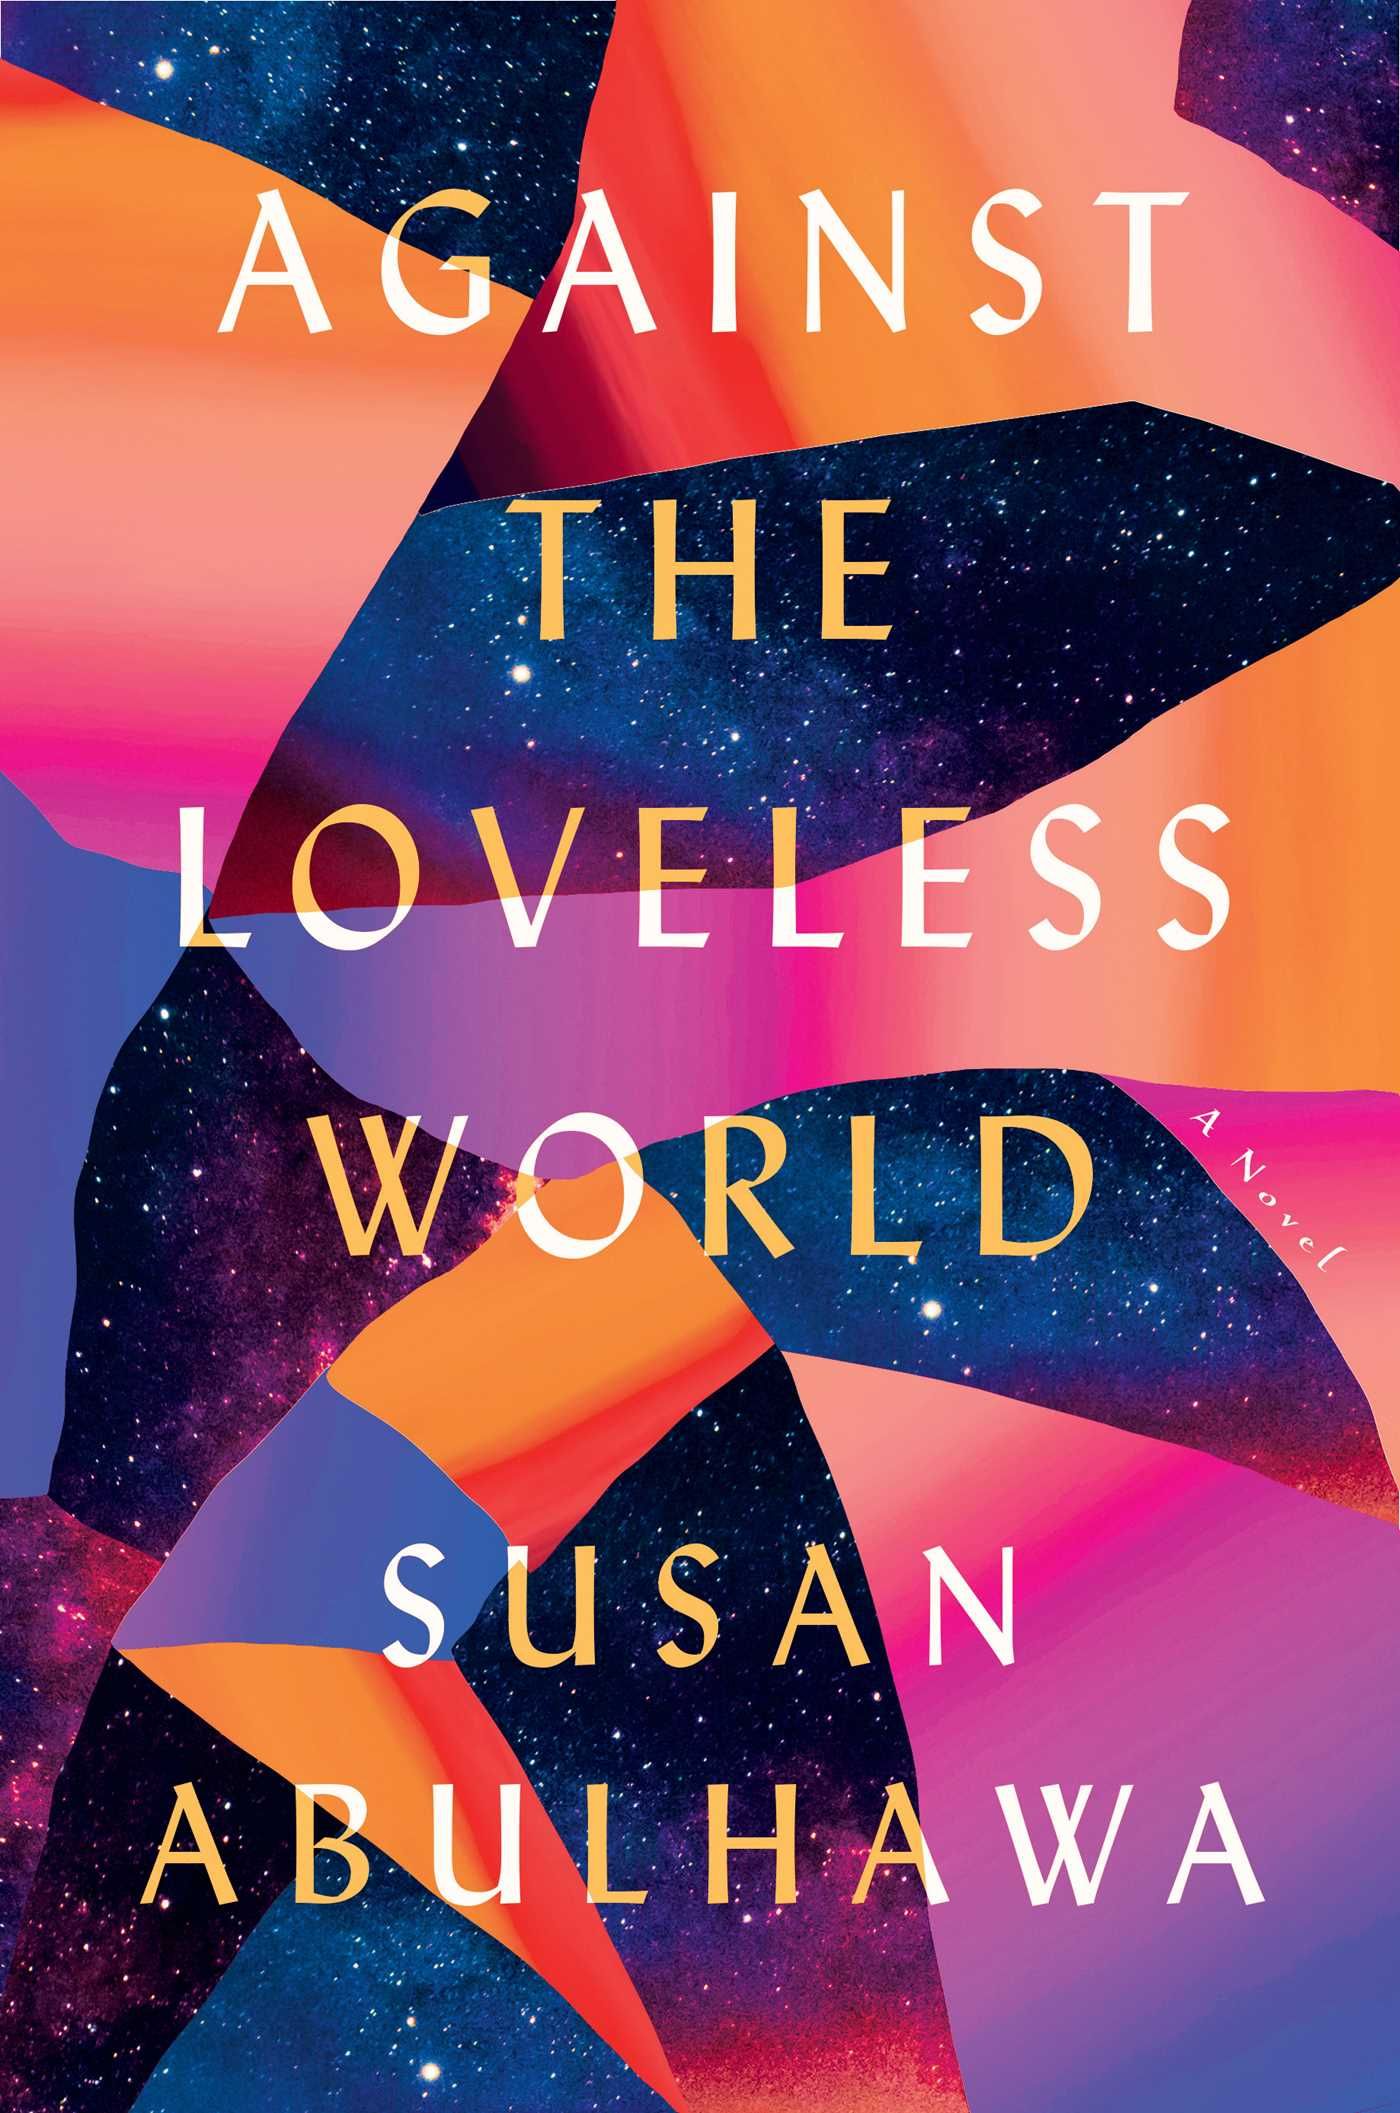 Against the Loveless World by Susan Abulhawa book cover